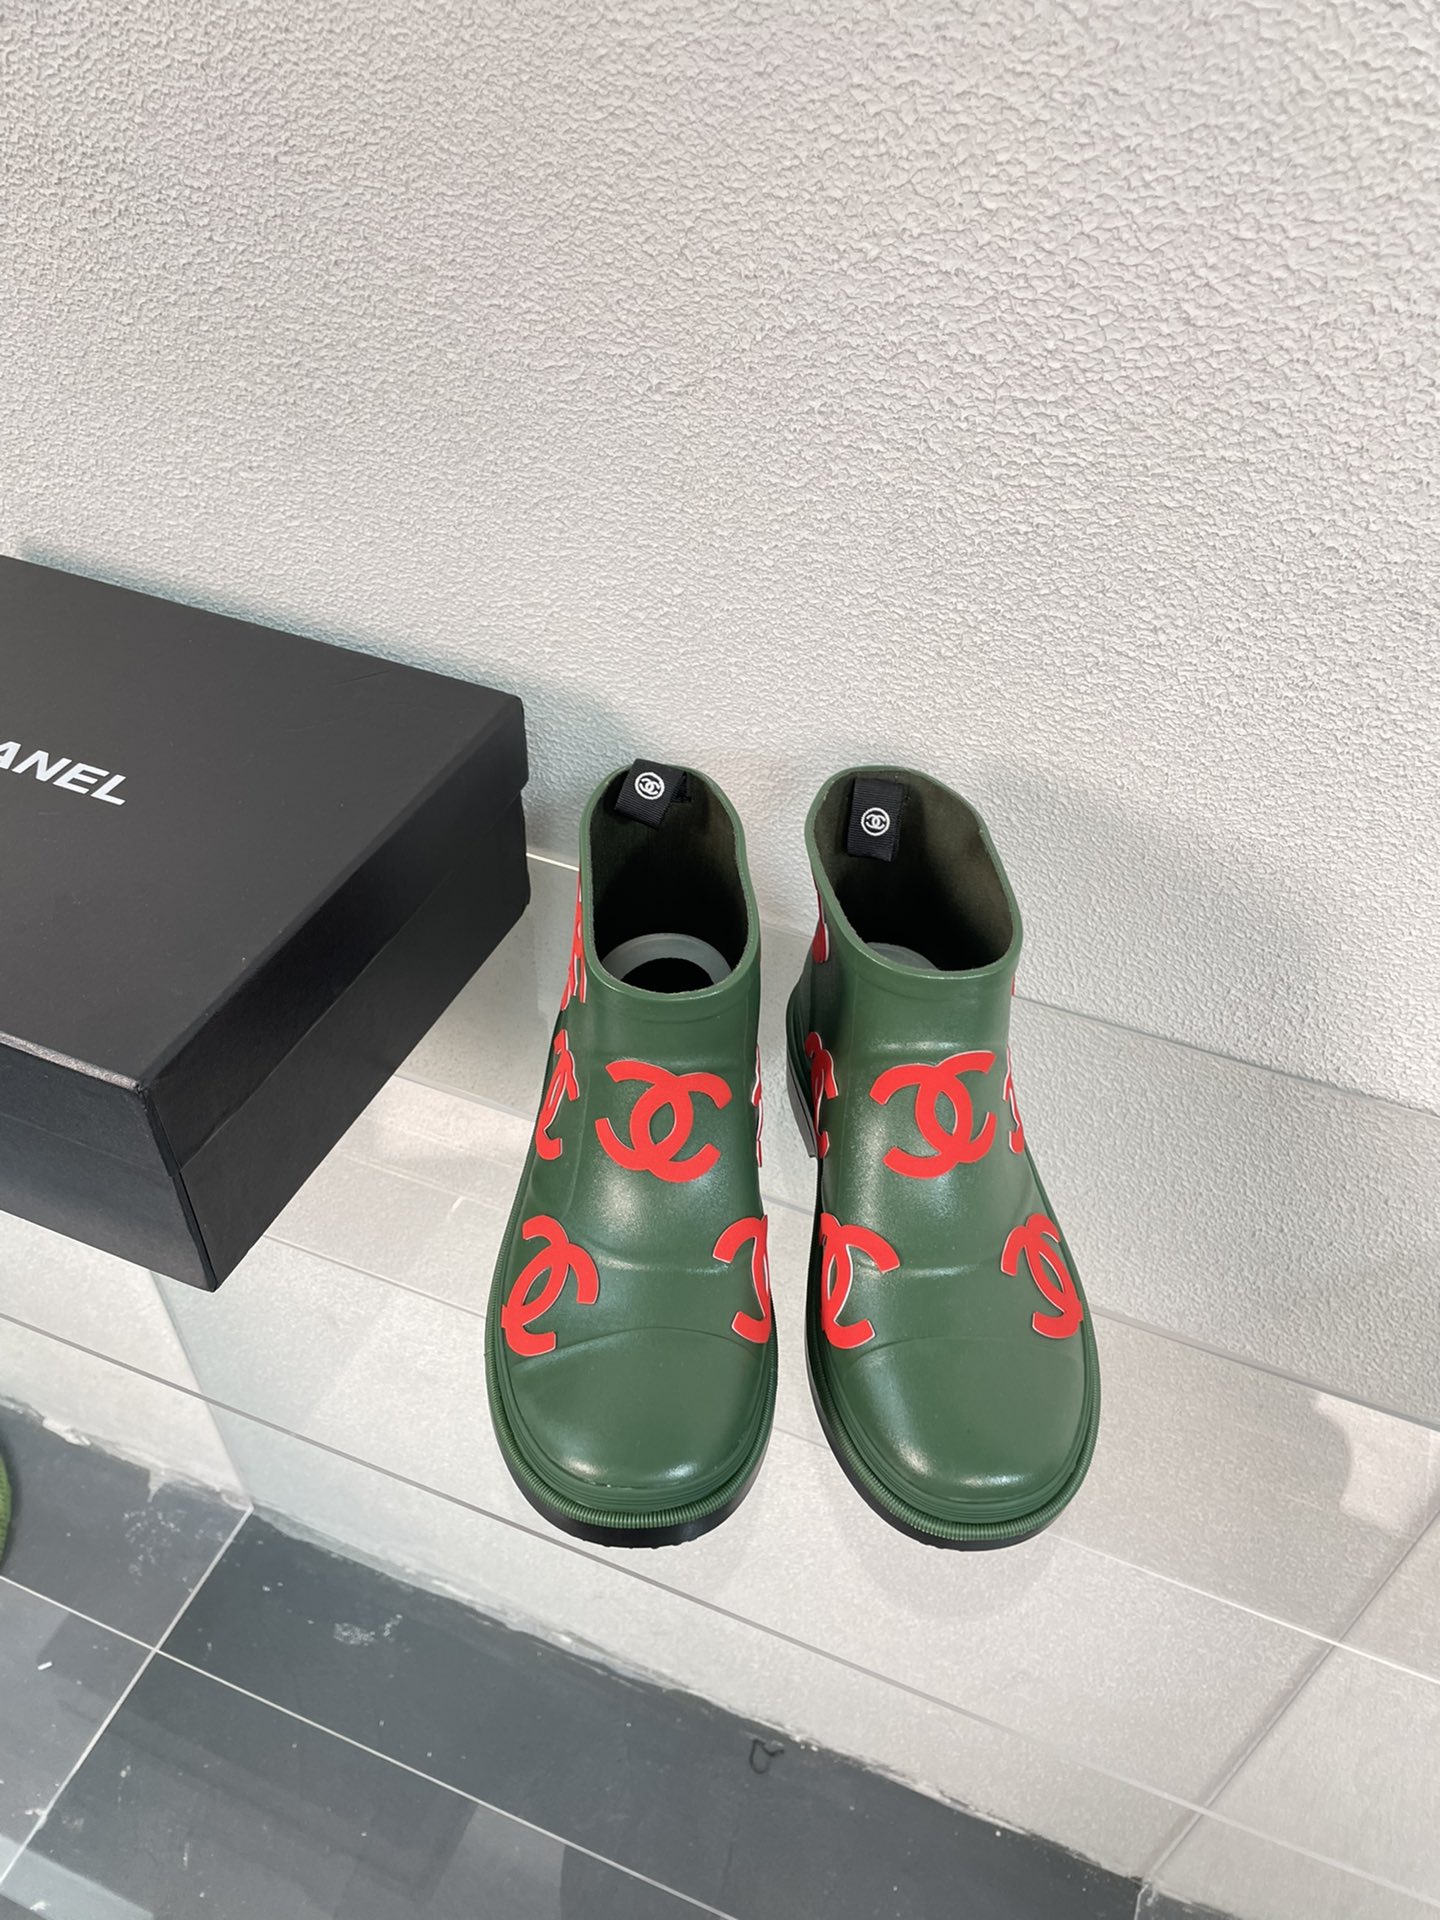 Chanel Boots Green Red